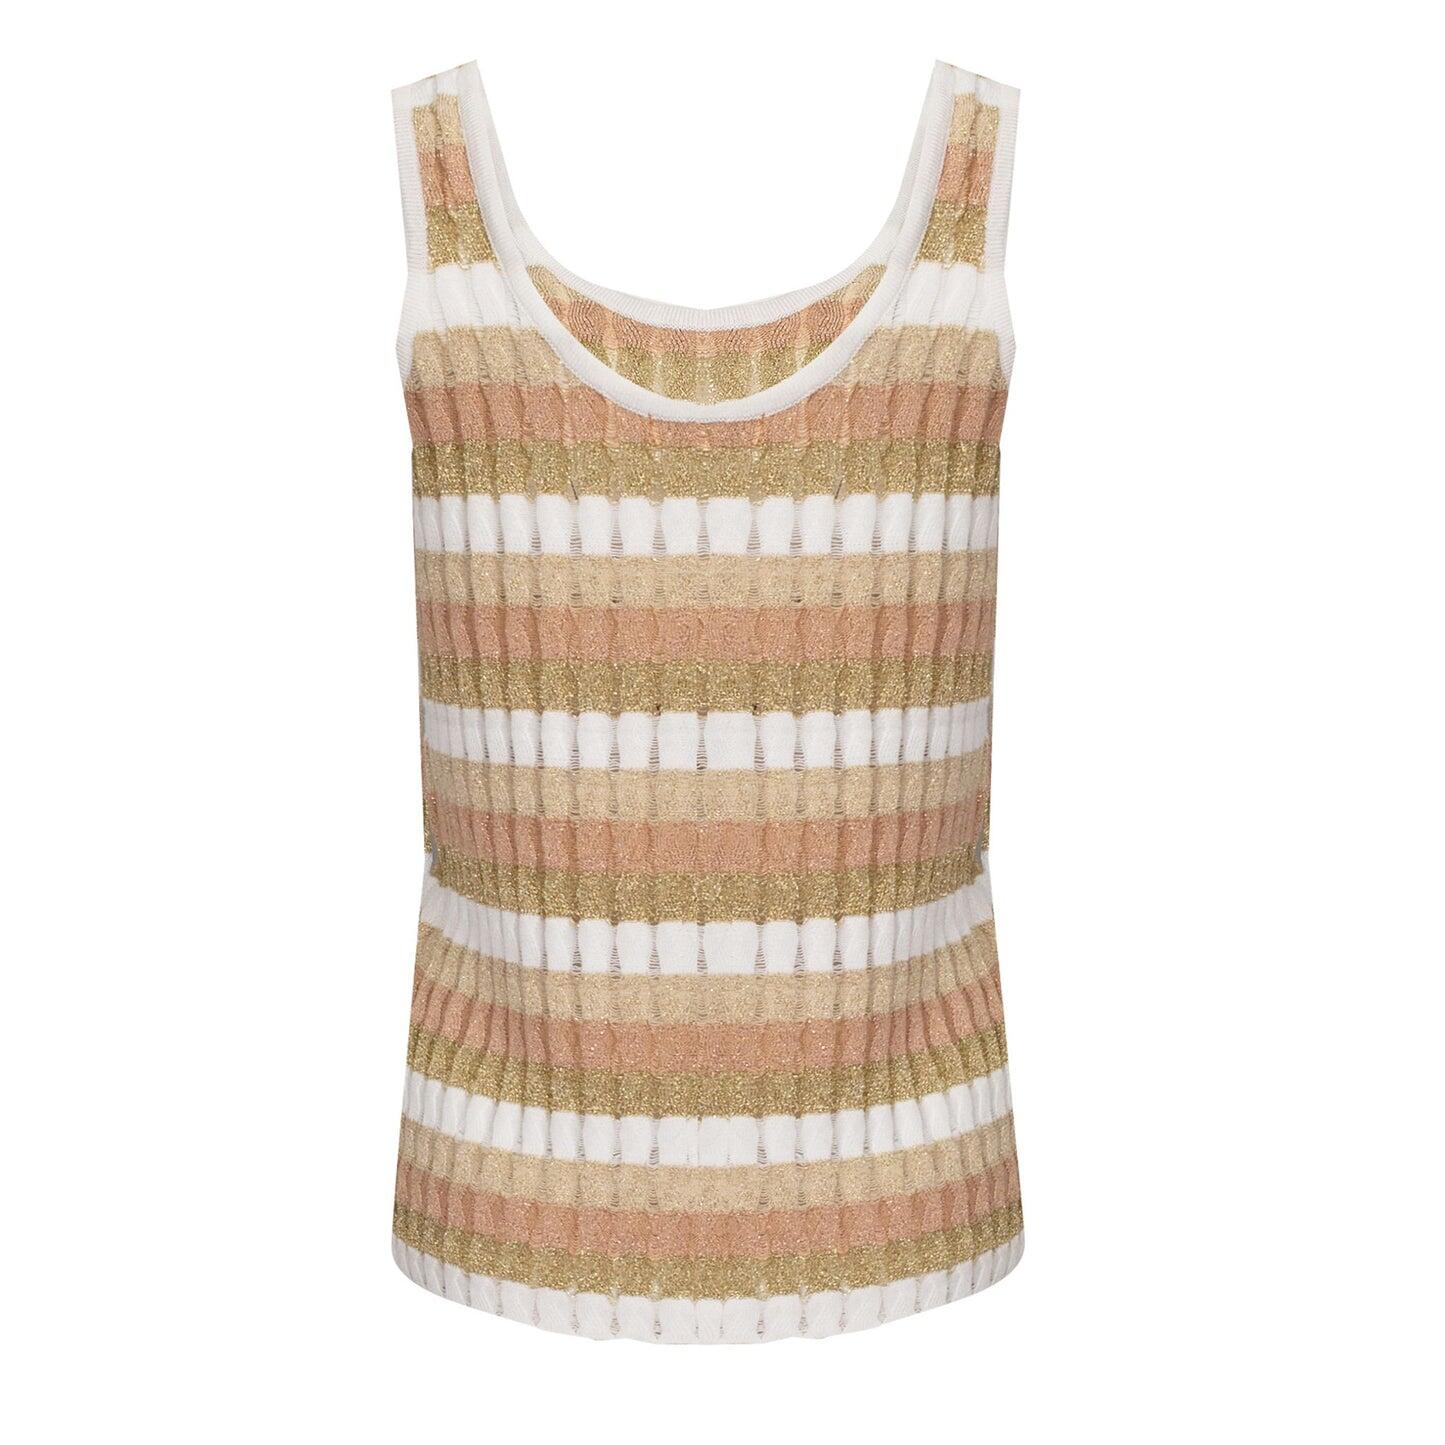 Load image into Gallery viewer, Tank Top in Racking Knit White/Gold/Peach/Beige
